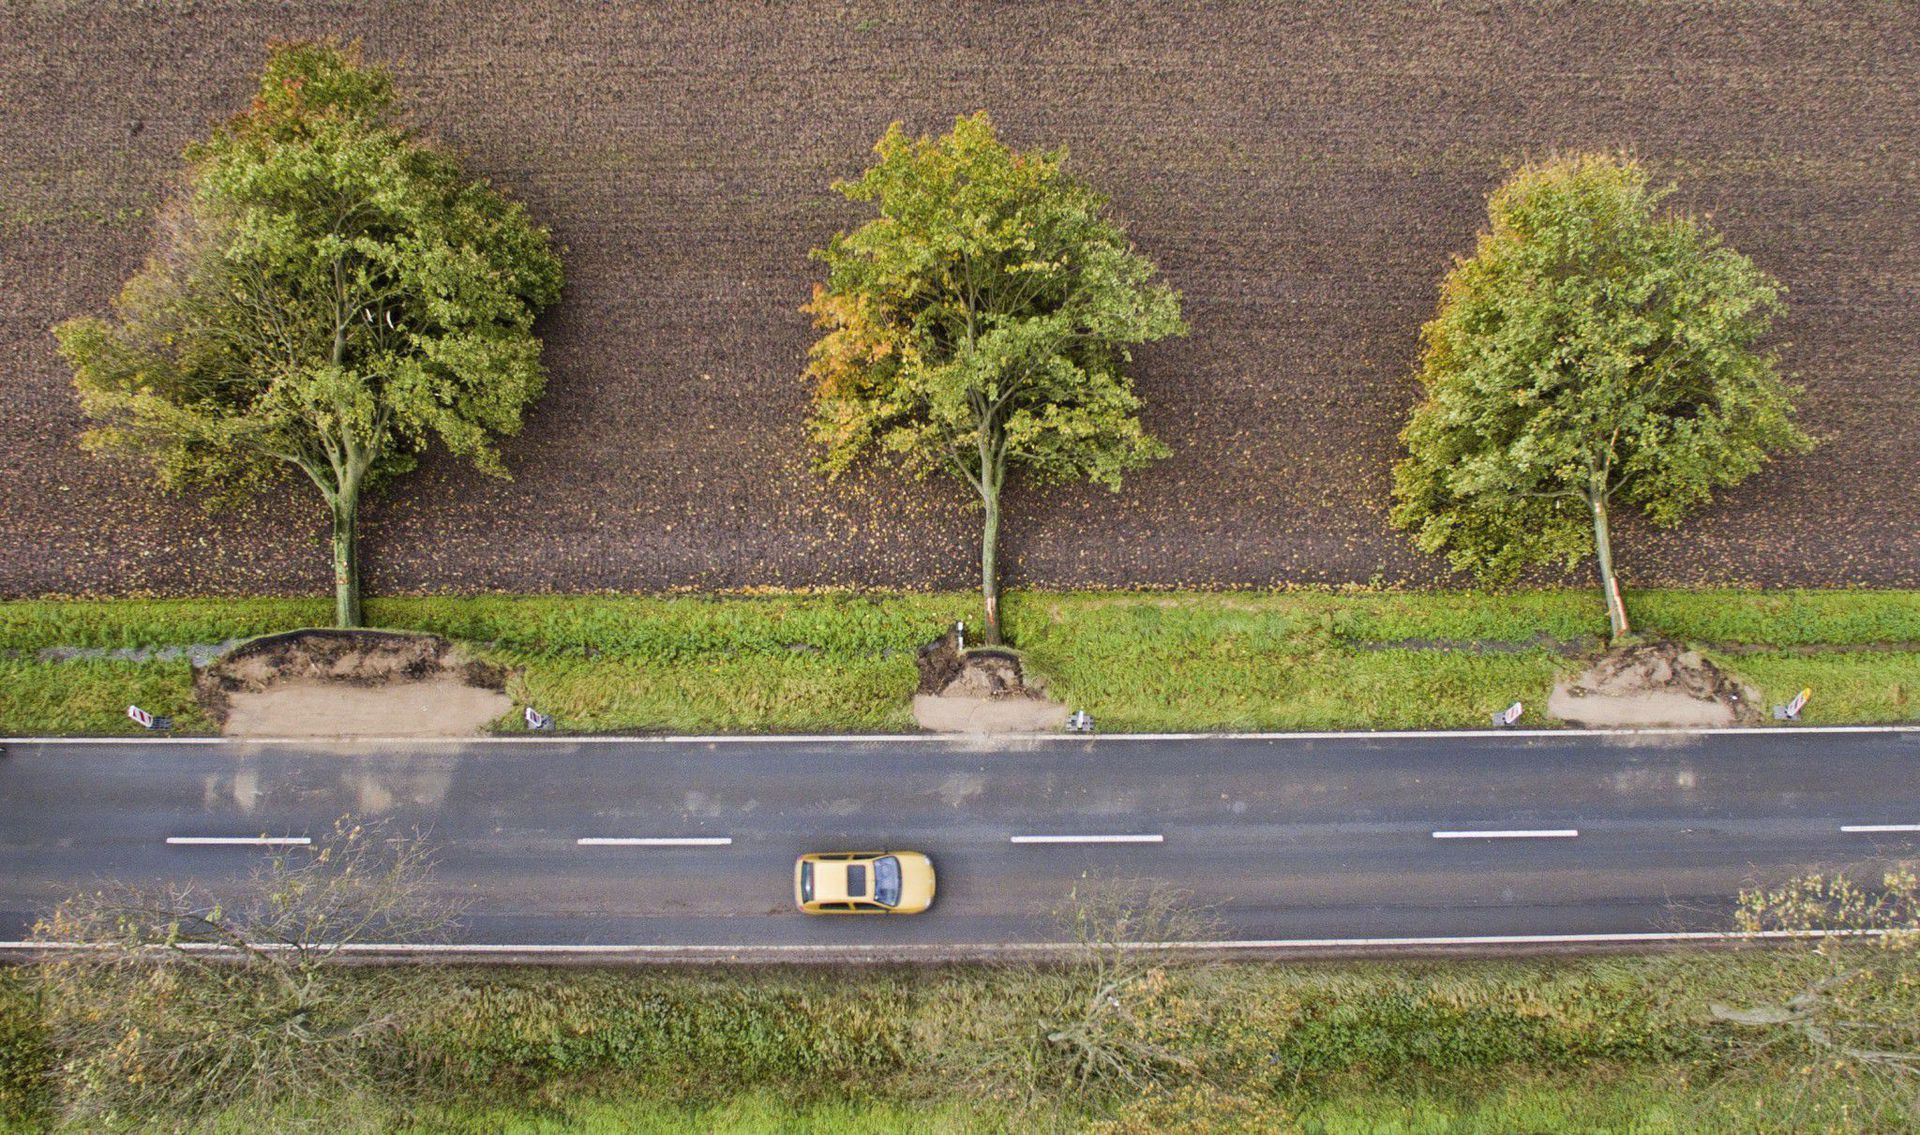 nature, Landscape, Trees, Road, Car, Birds eye view, Germany, Saxony, Field, Environment, Disaster Wallpaper